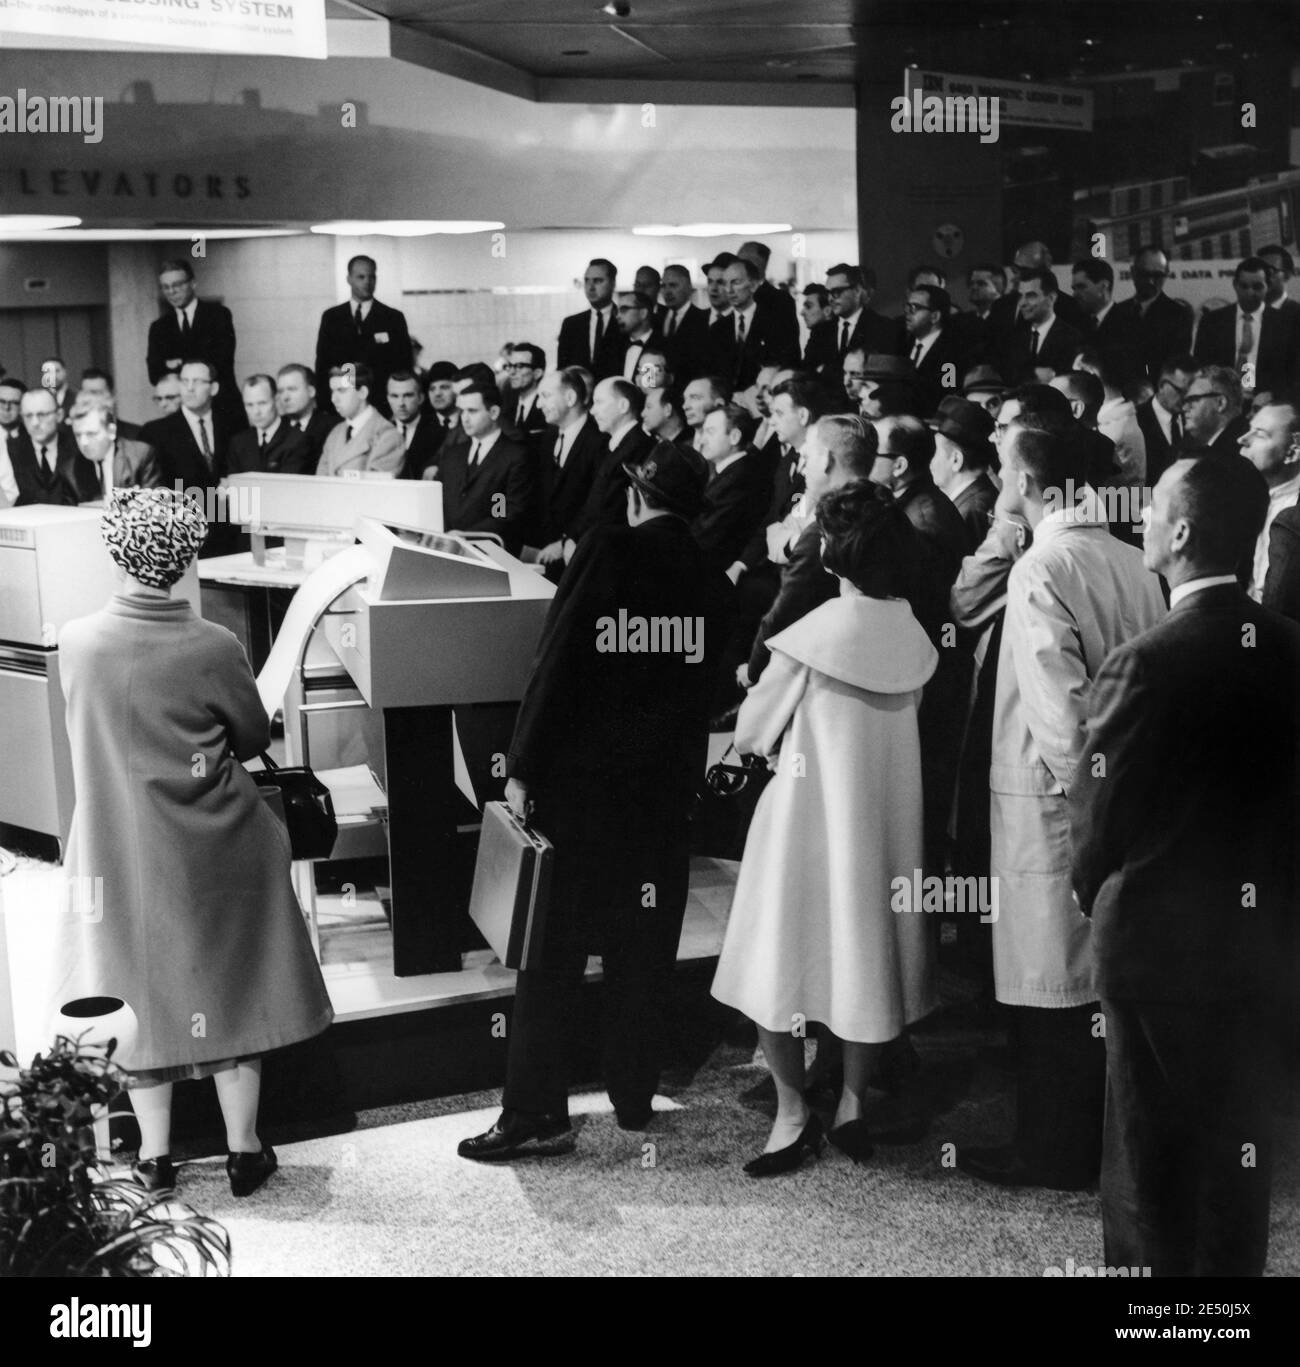 Demonstration of the IBM 1440 Data Processing System computer at the IBM Business Show in New York City's New York Coliseum, April 1963. (USA) Stock Photo